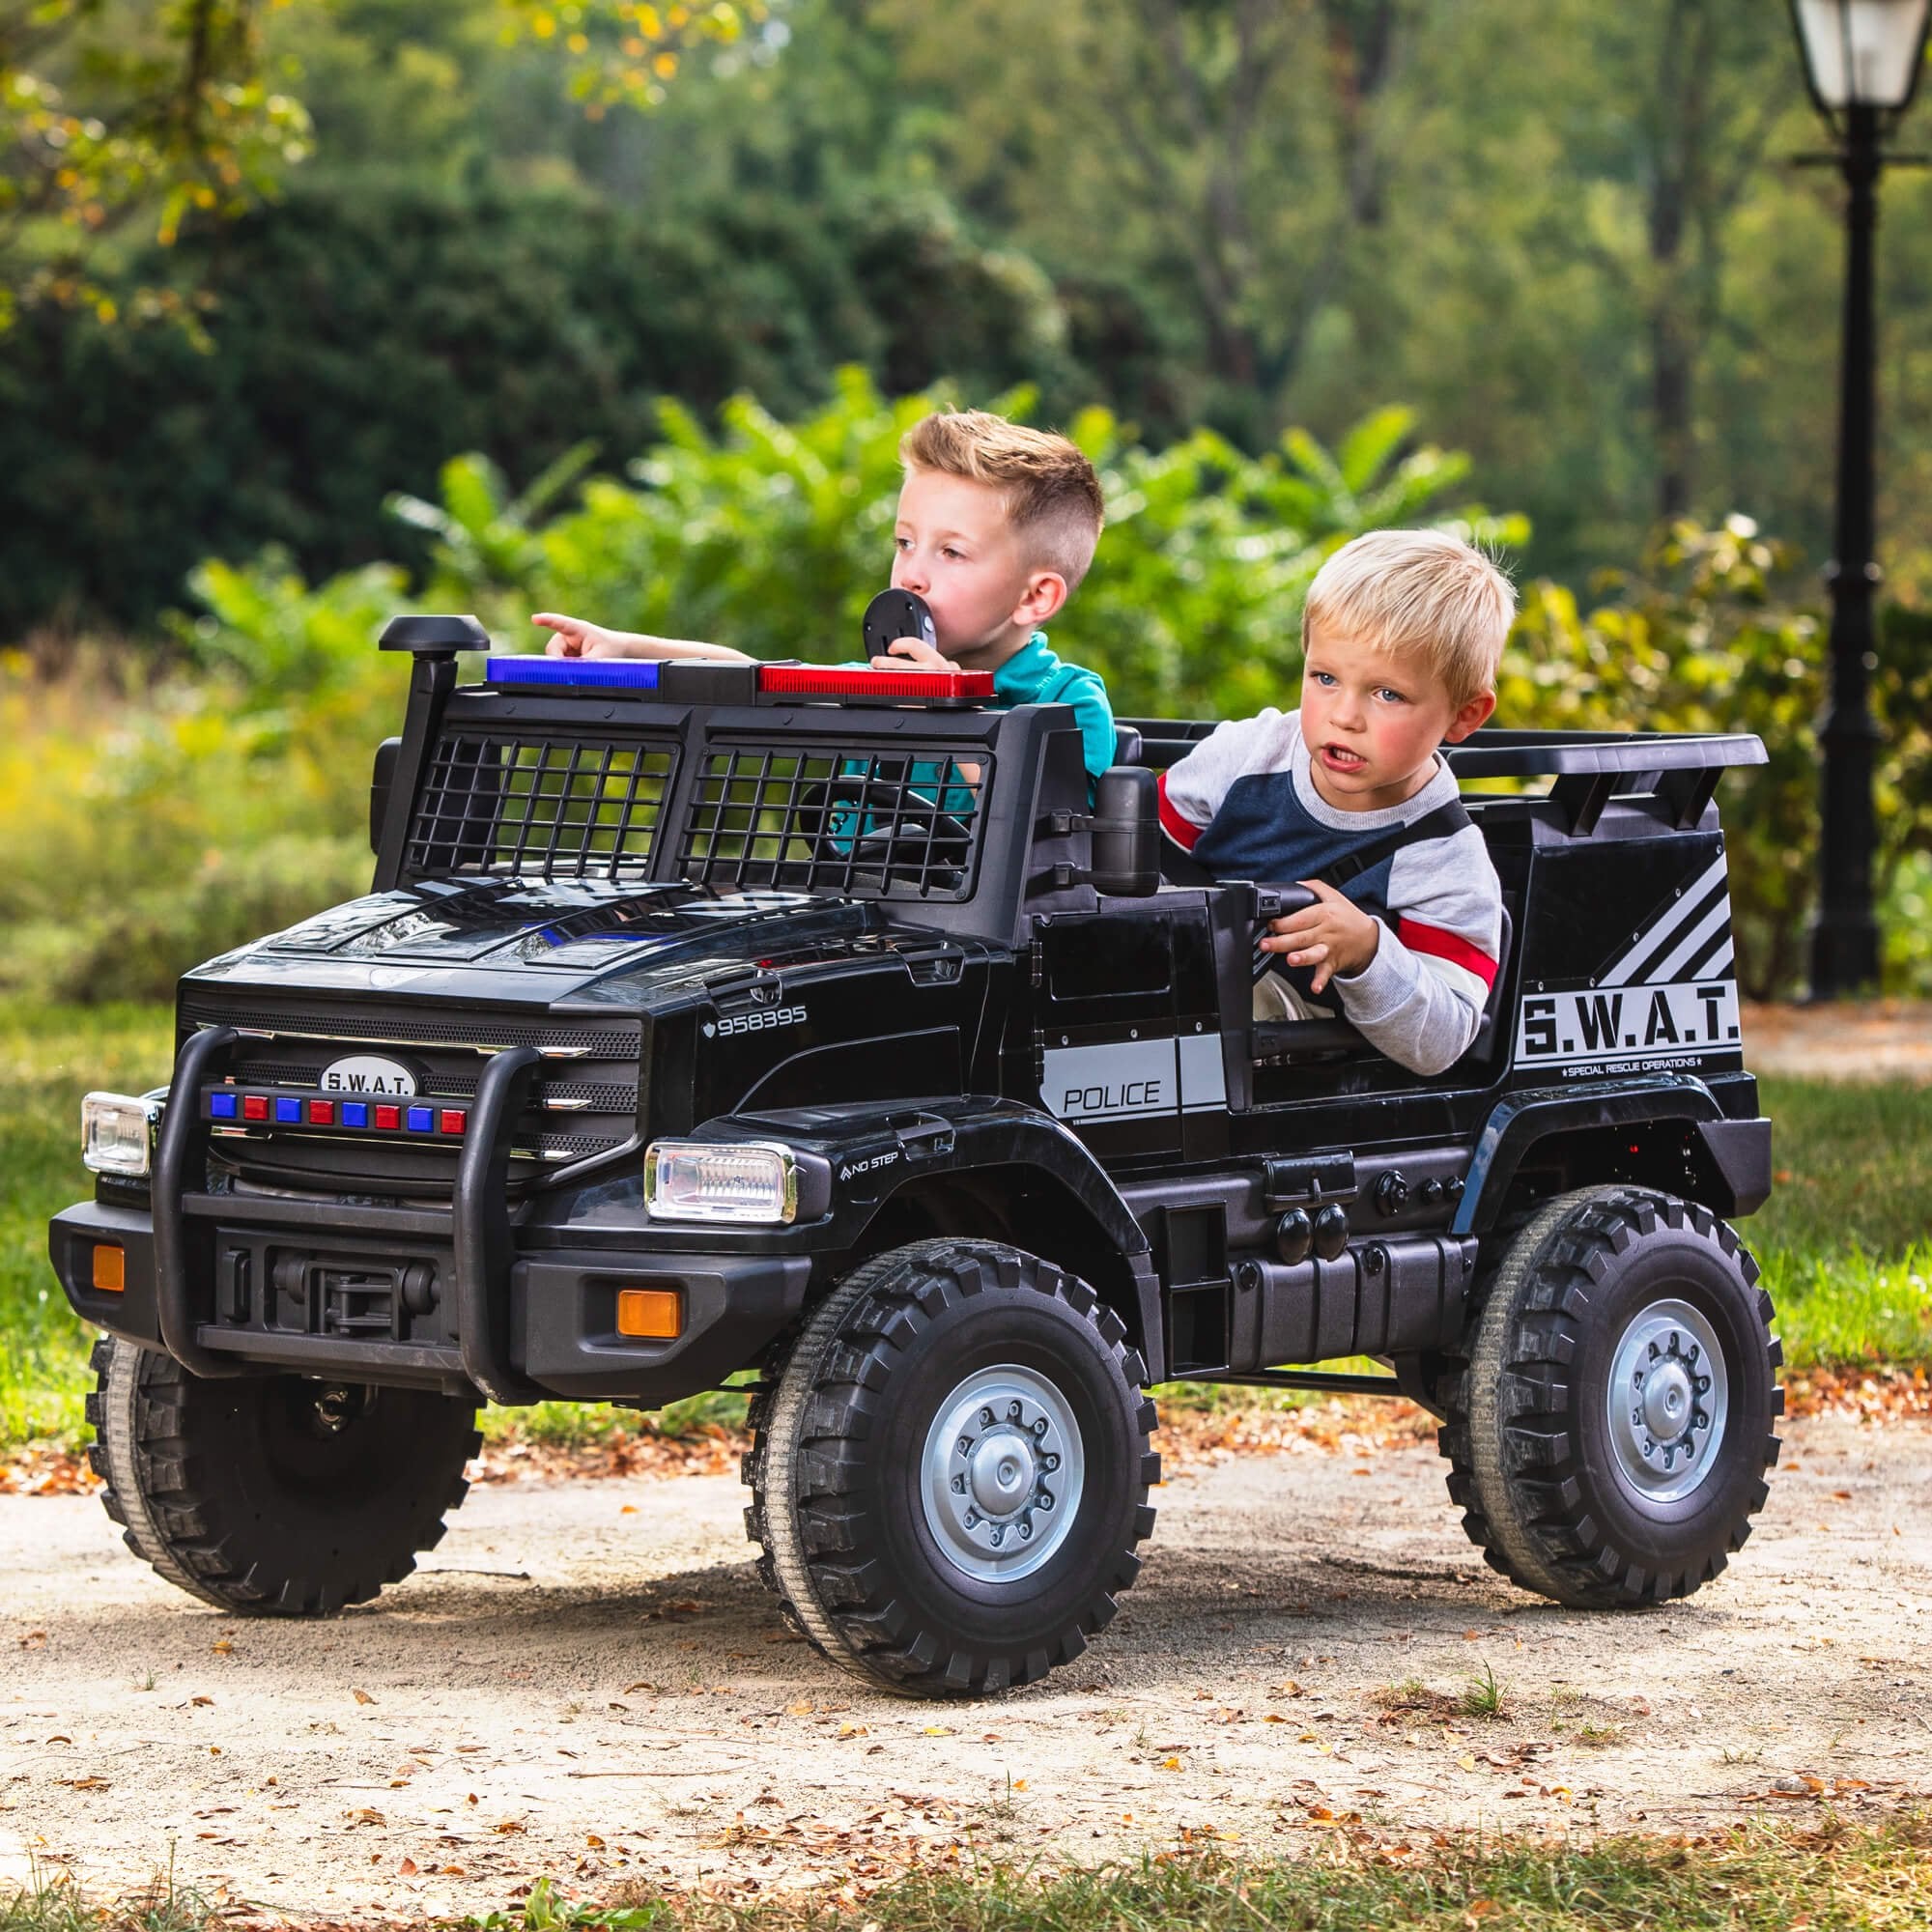 police swat truck toy